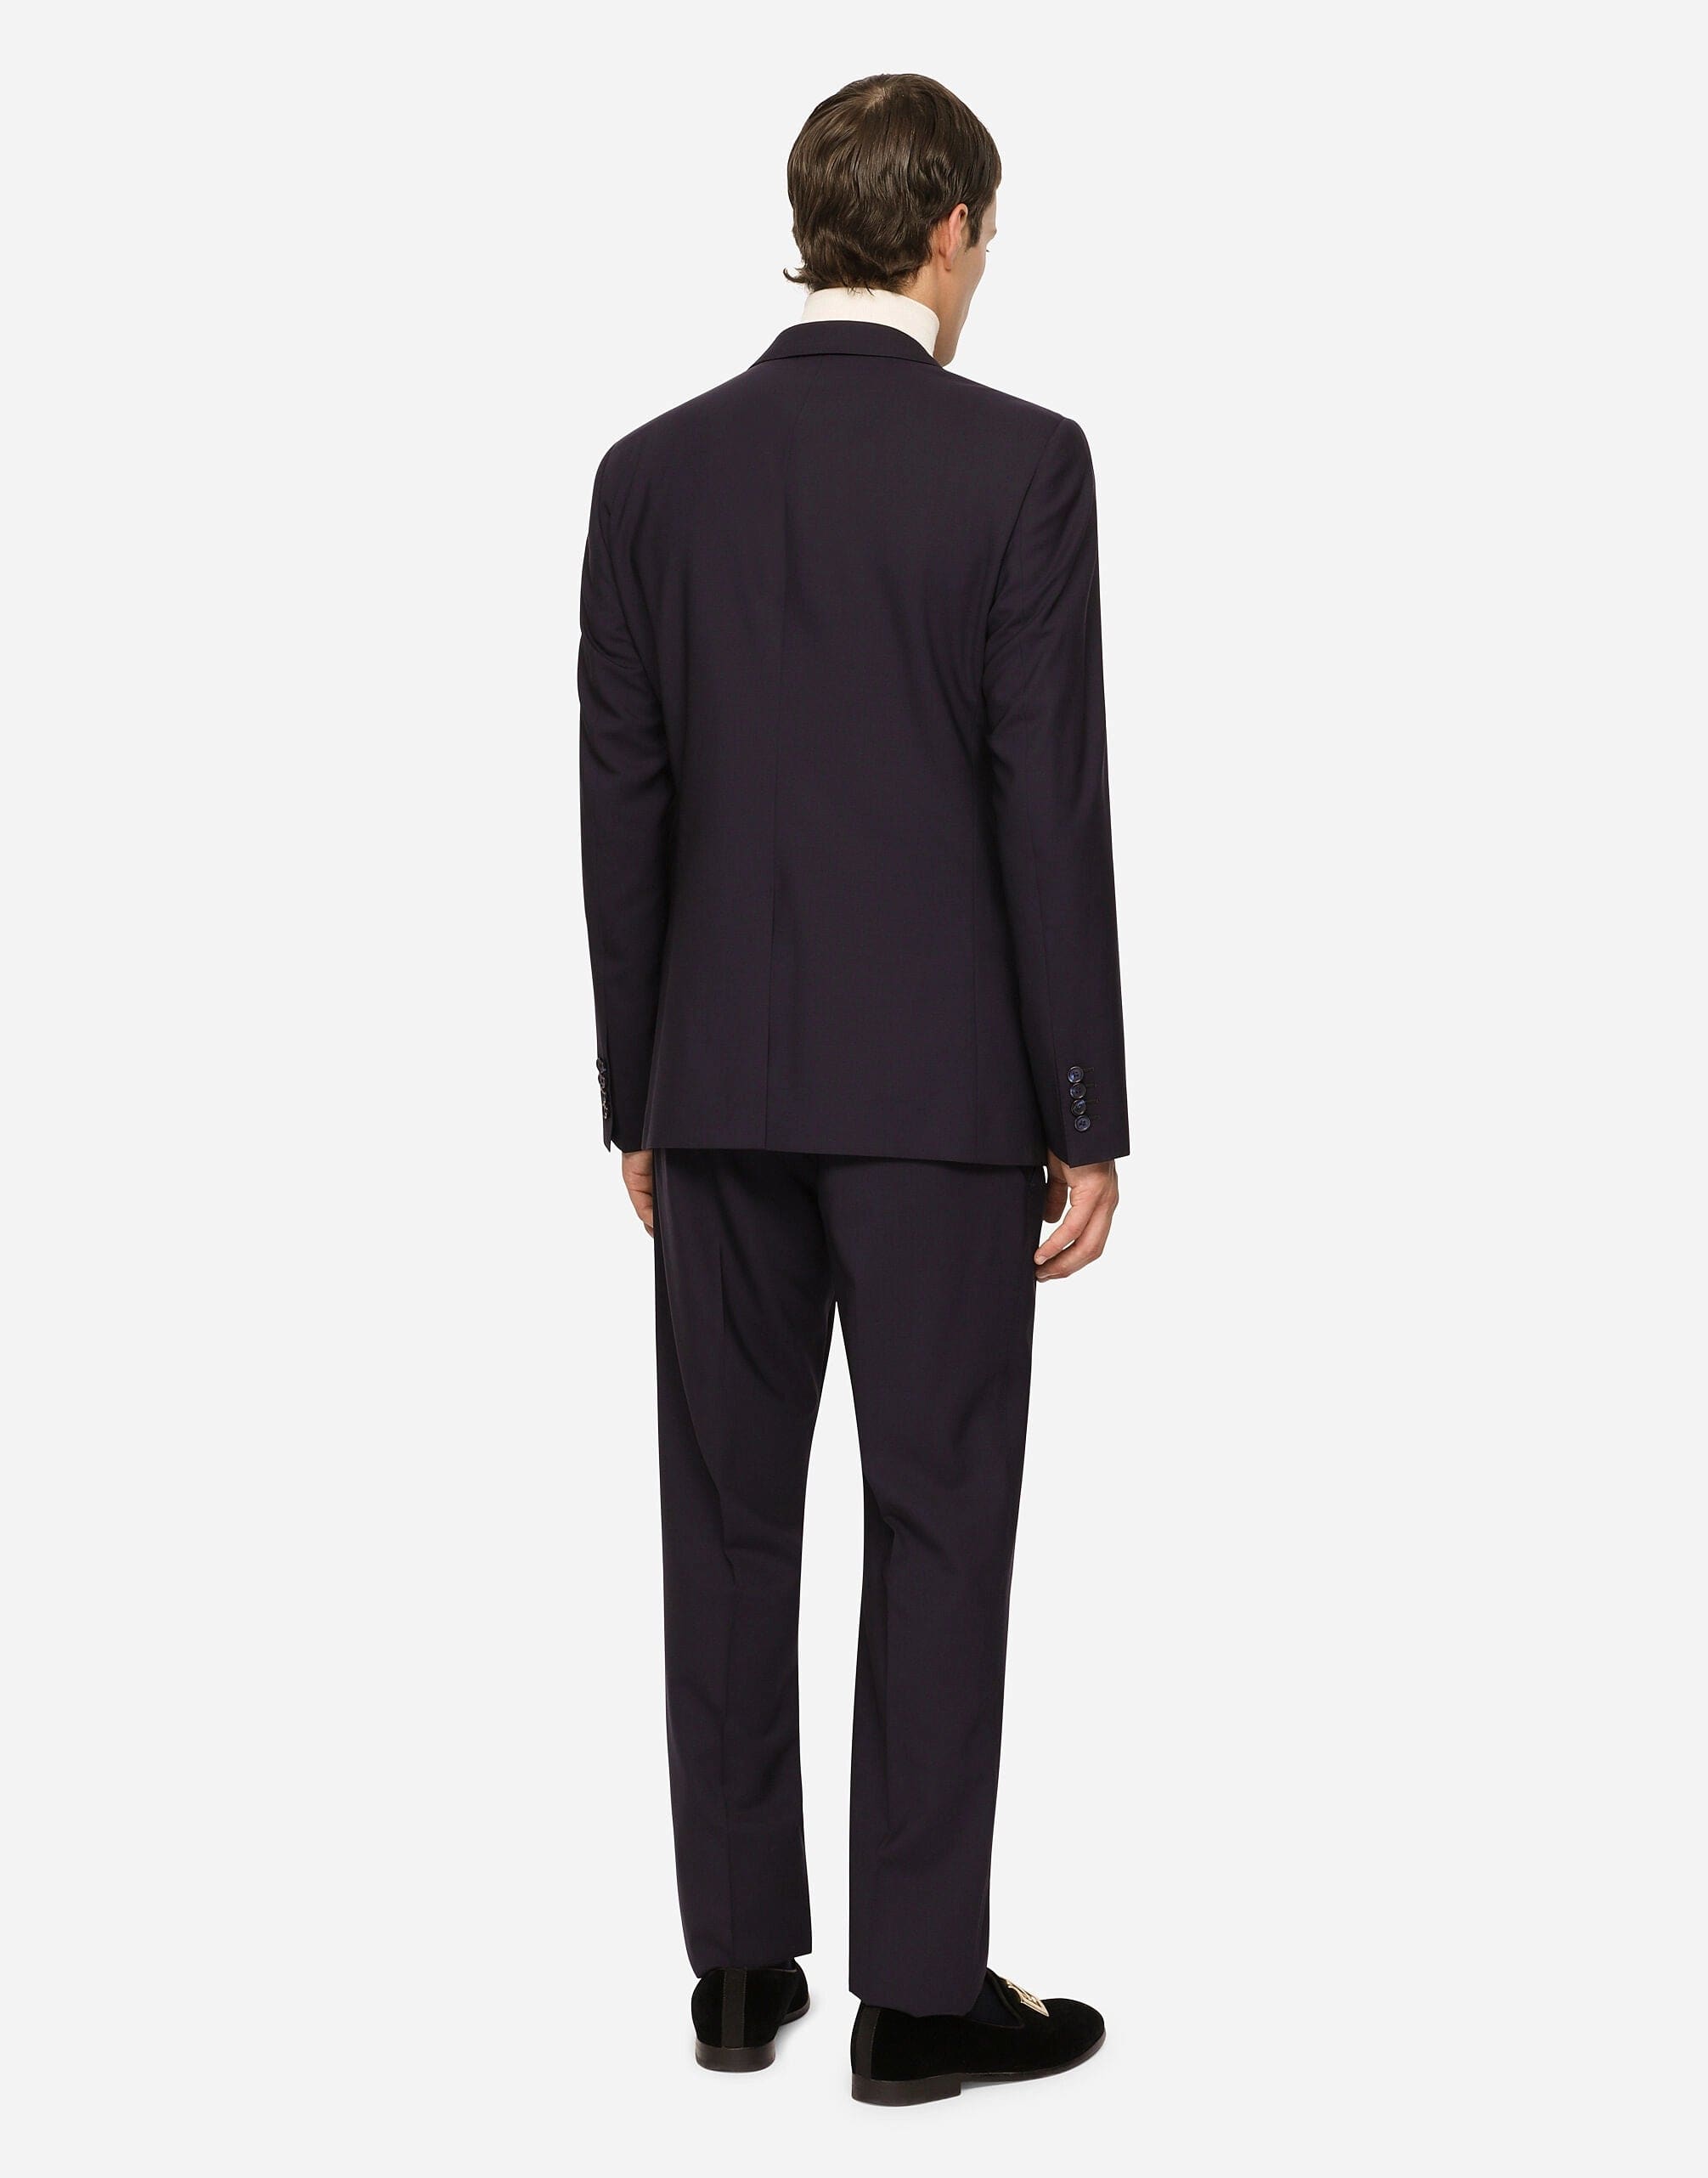 Dolce & Gabbana Stretch Wool Two-Piece Martini-Fit Suit